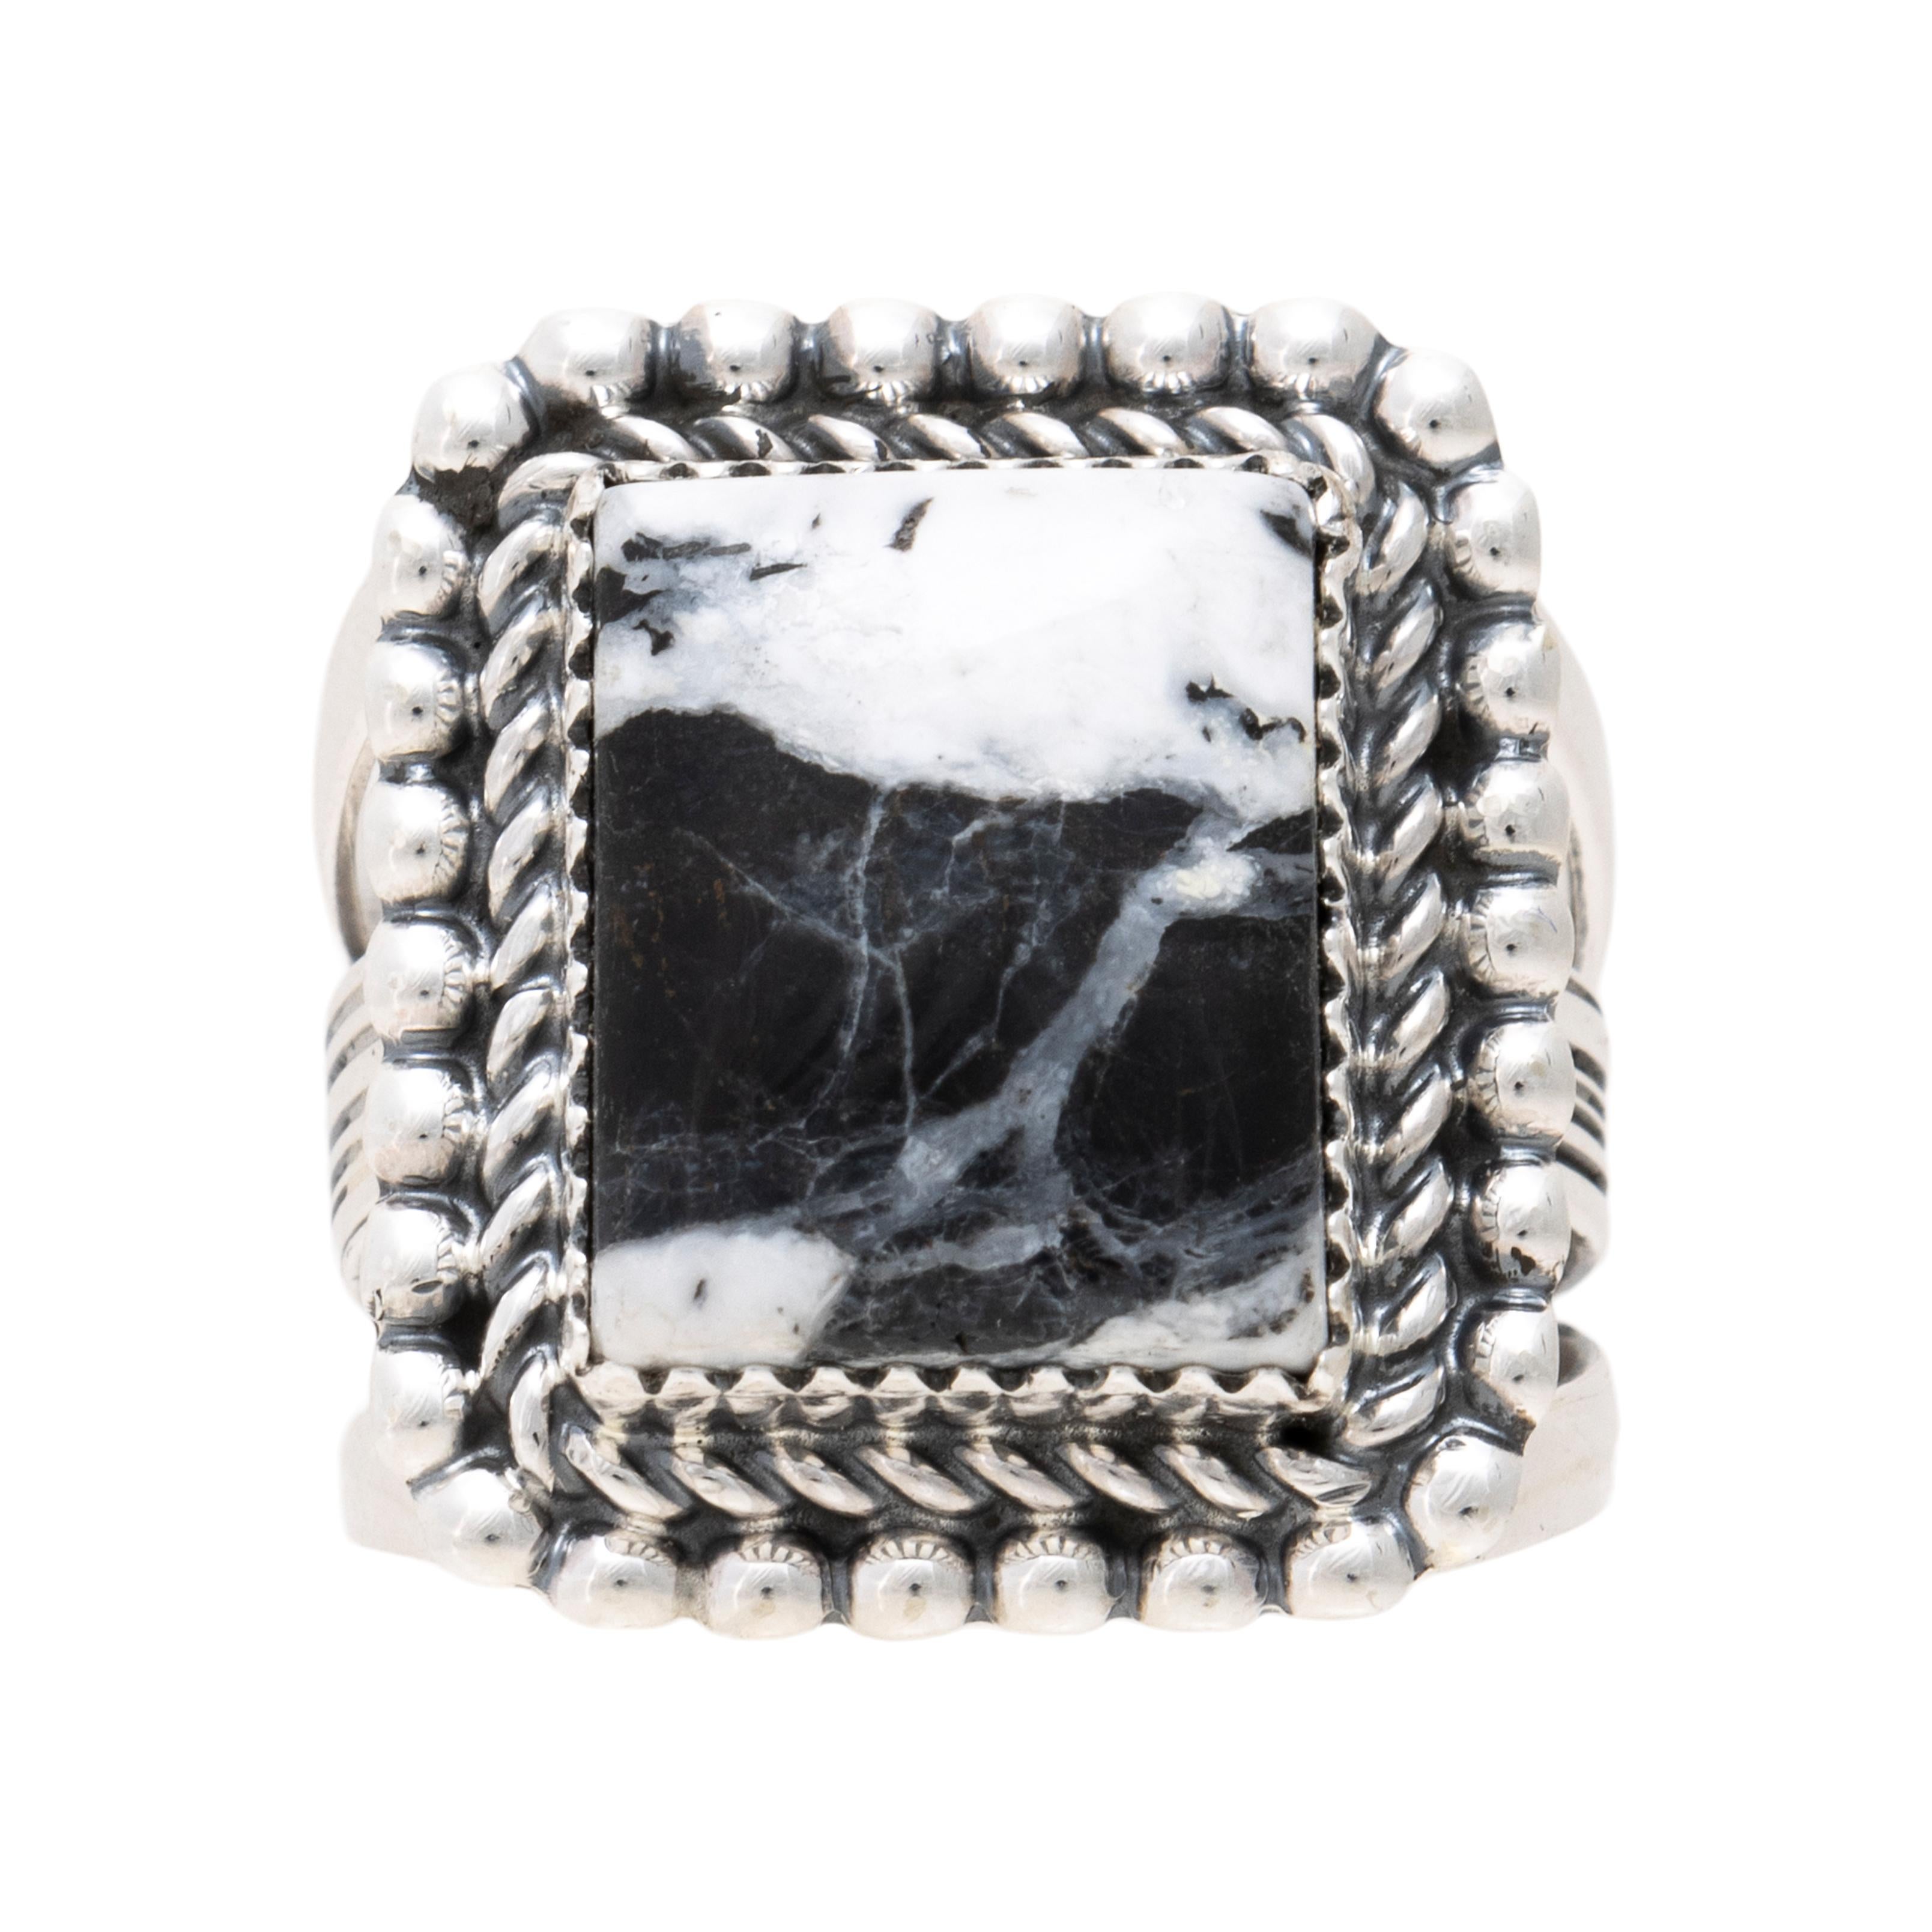 Native American Navajo Indian sterling silver and White Buffalo turquoise ring by Avin Joe. Featuring a large square shaped natural, untreated stone set in sterling silver with classic twisted rope border. Stone has a stark black and white coloring